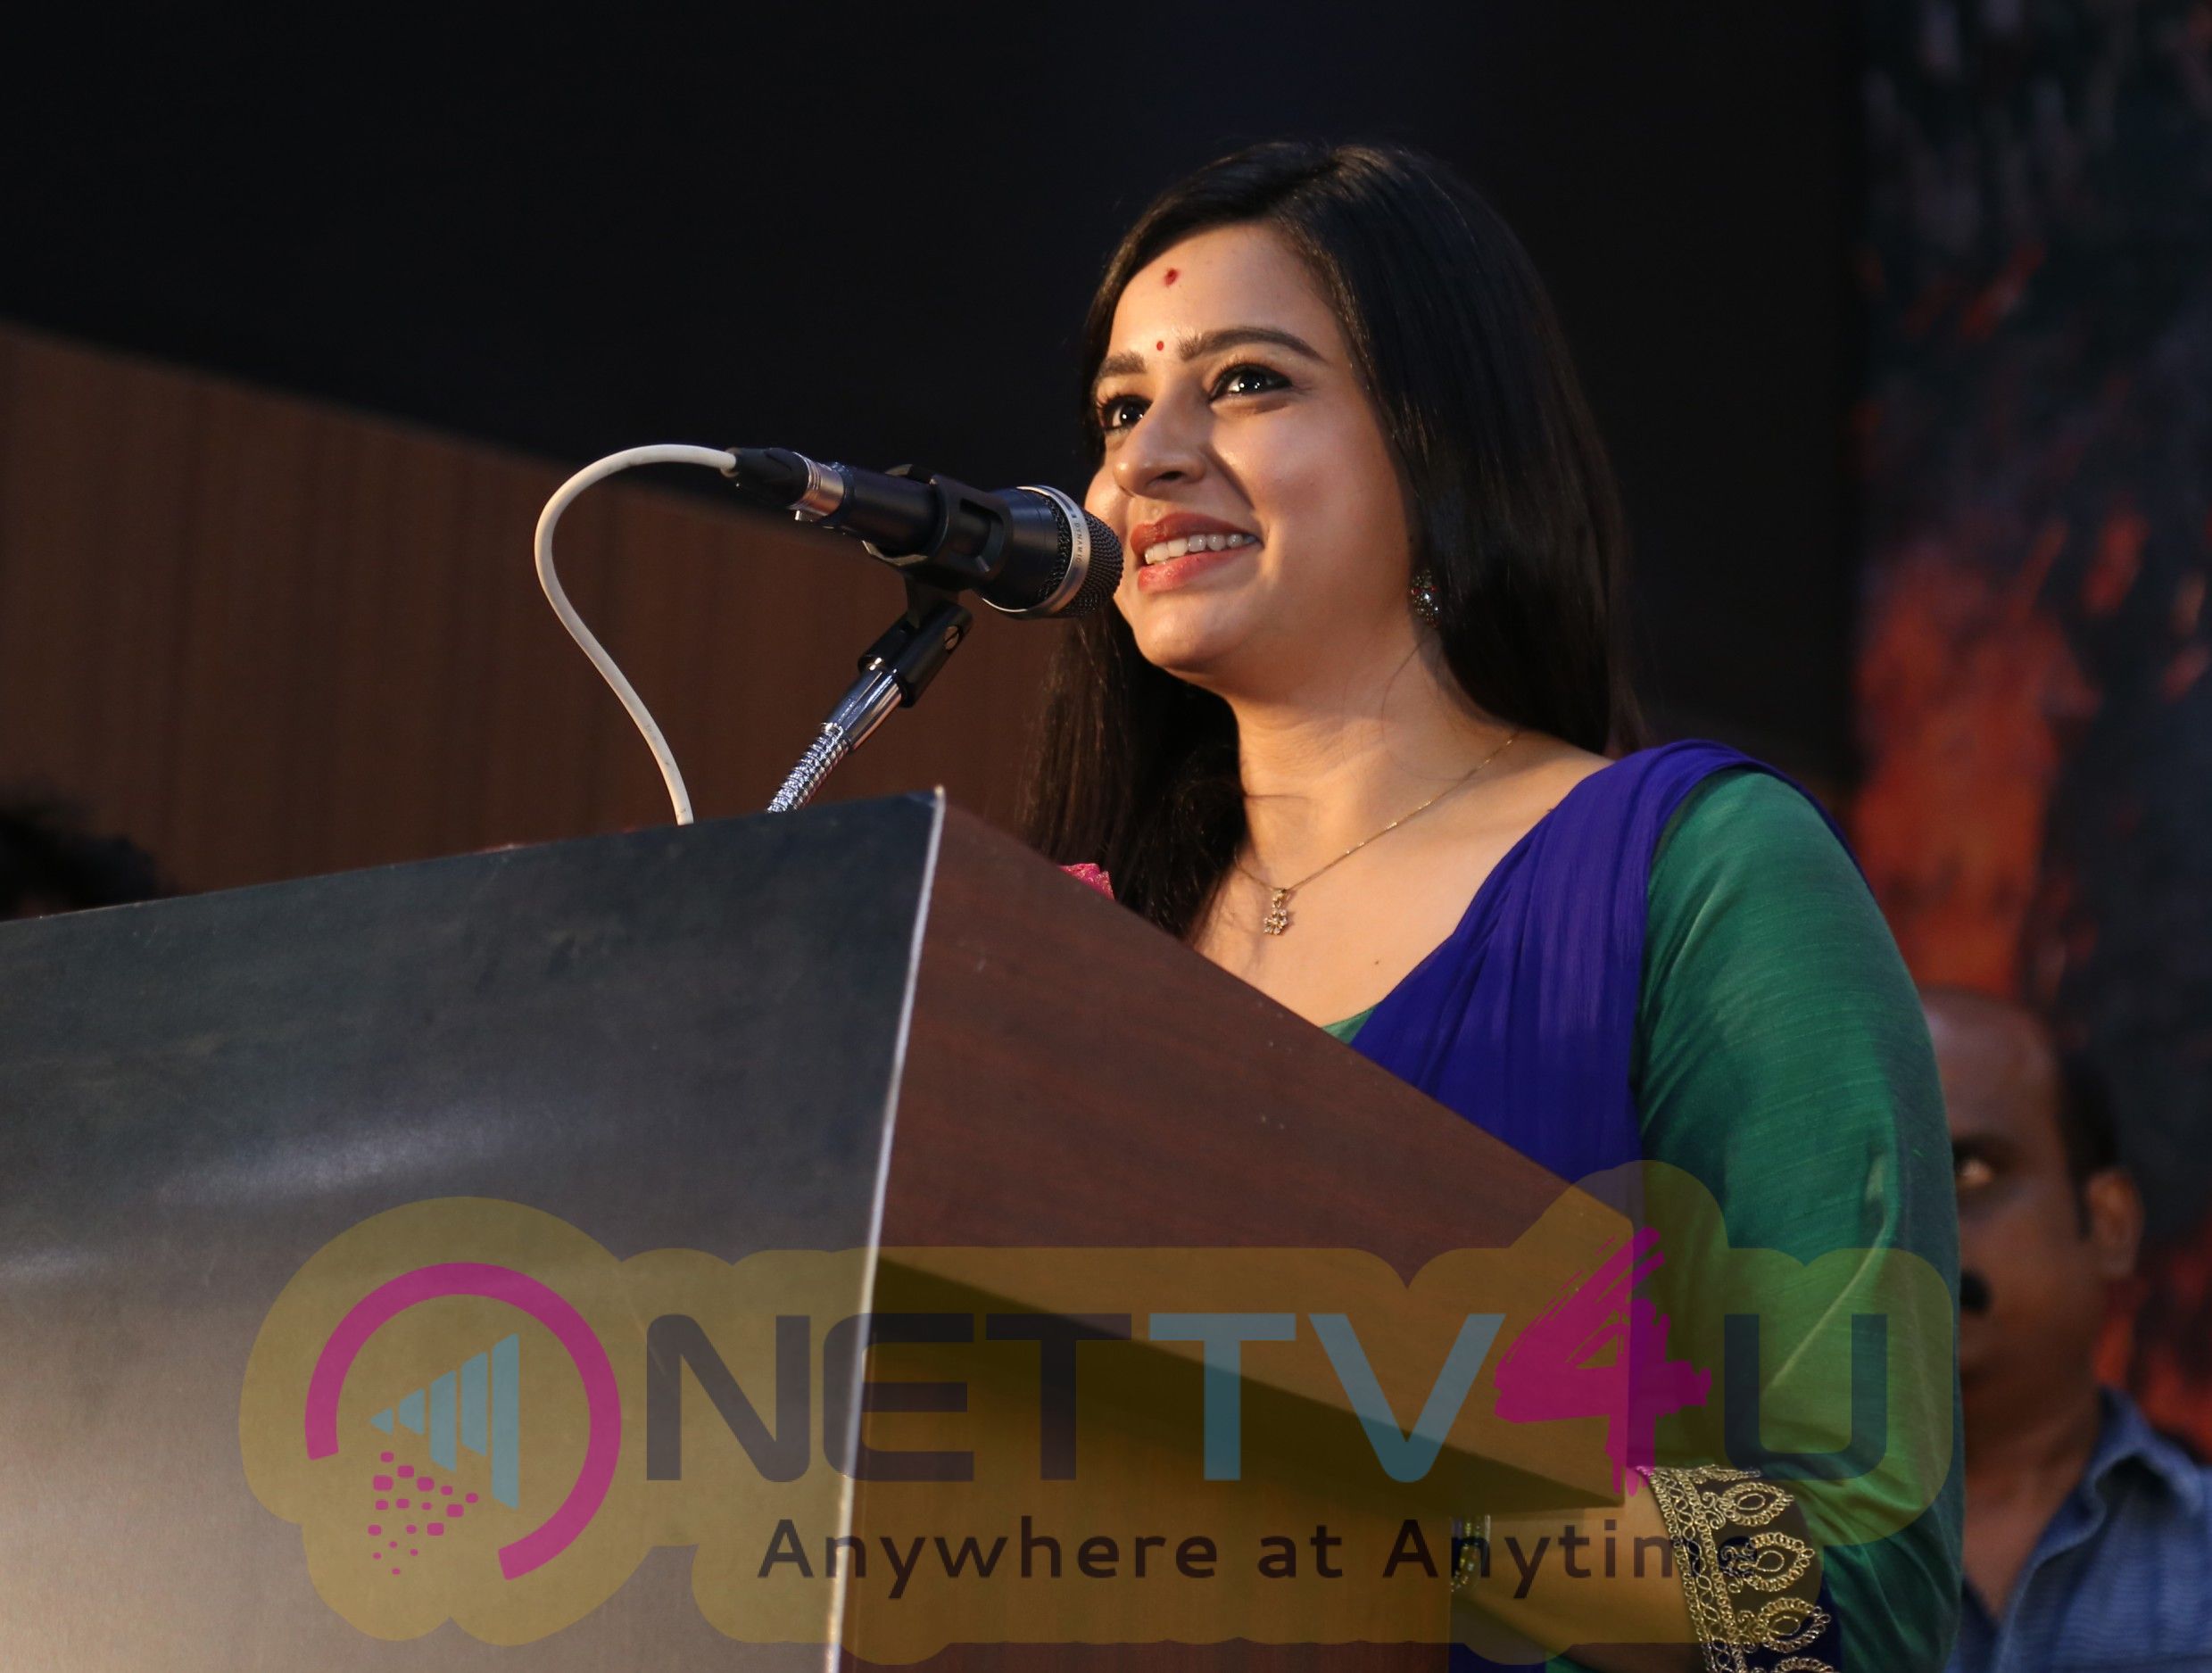 Adangathey Movie Audio And Trailer Launch Photos Tamil Gallery